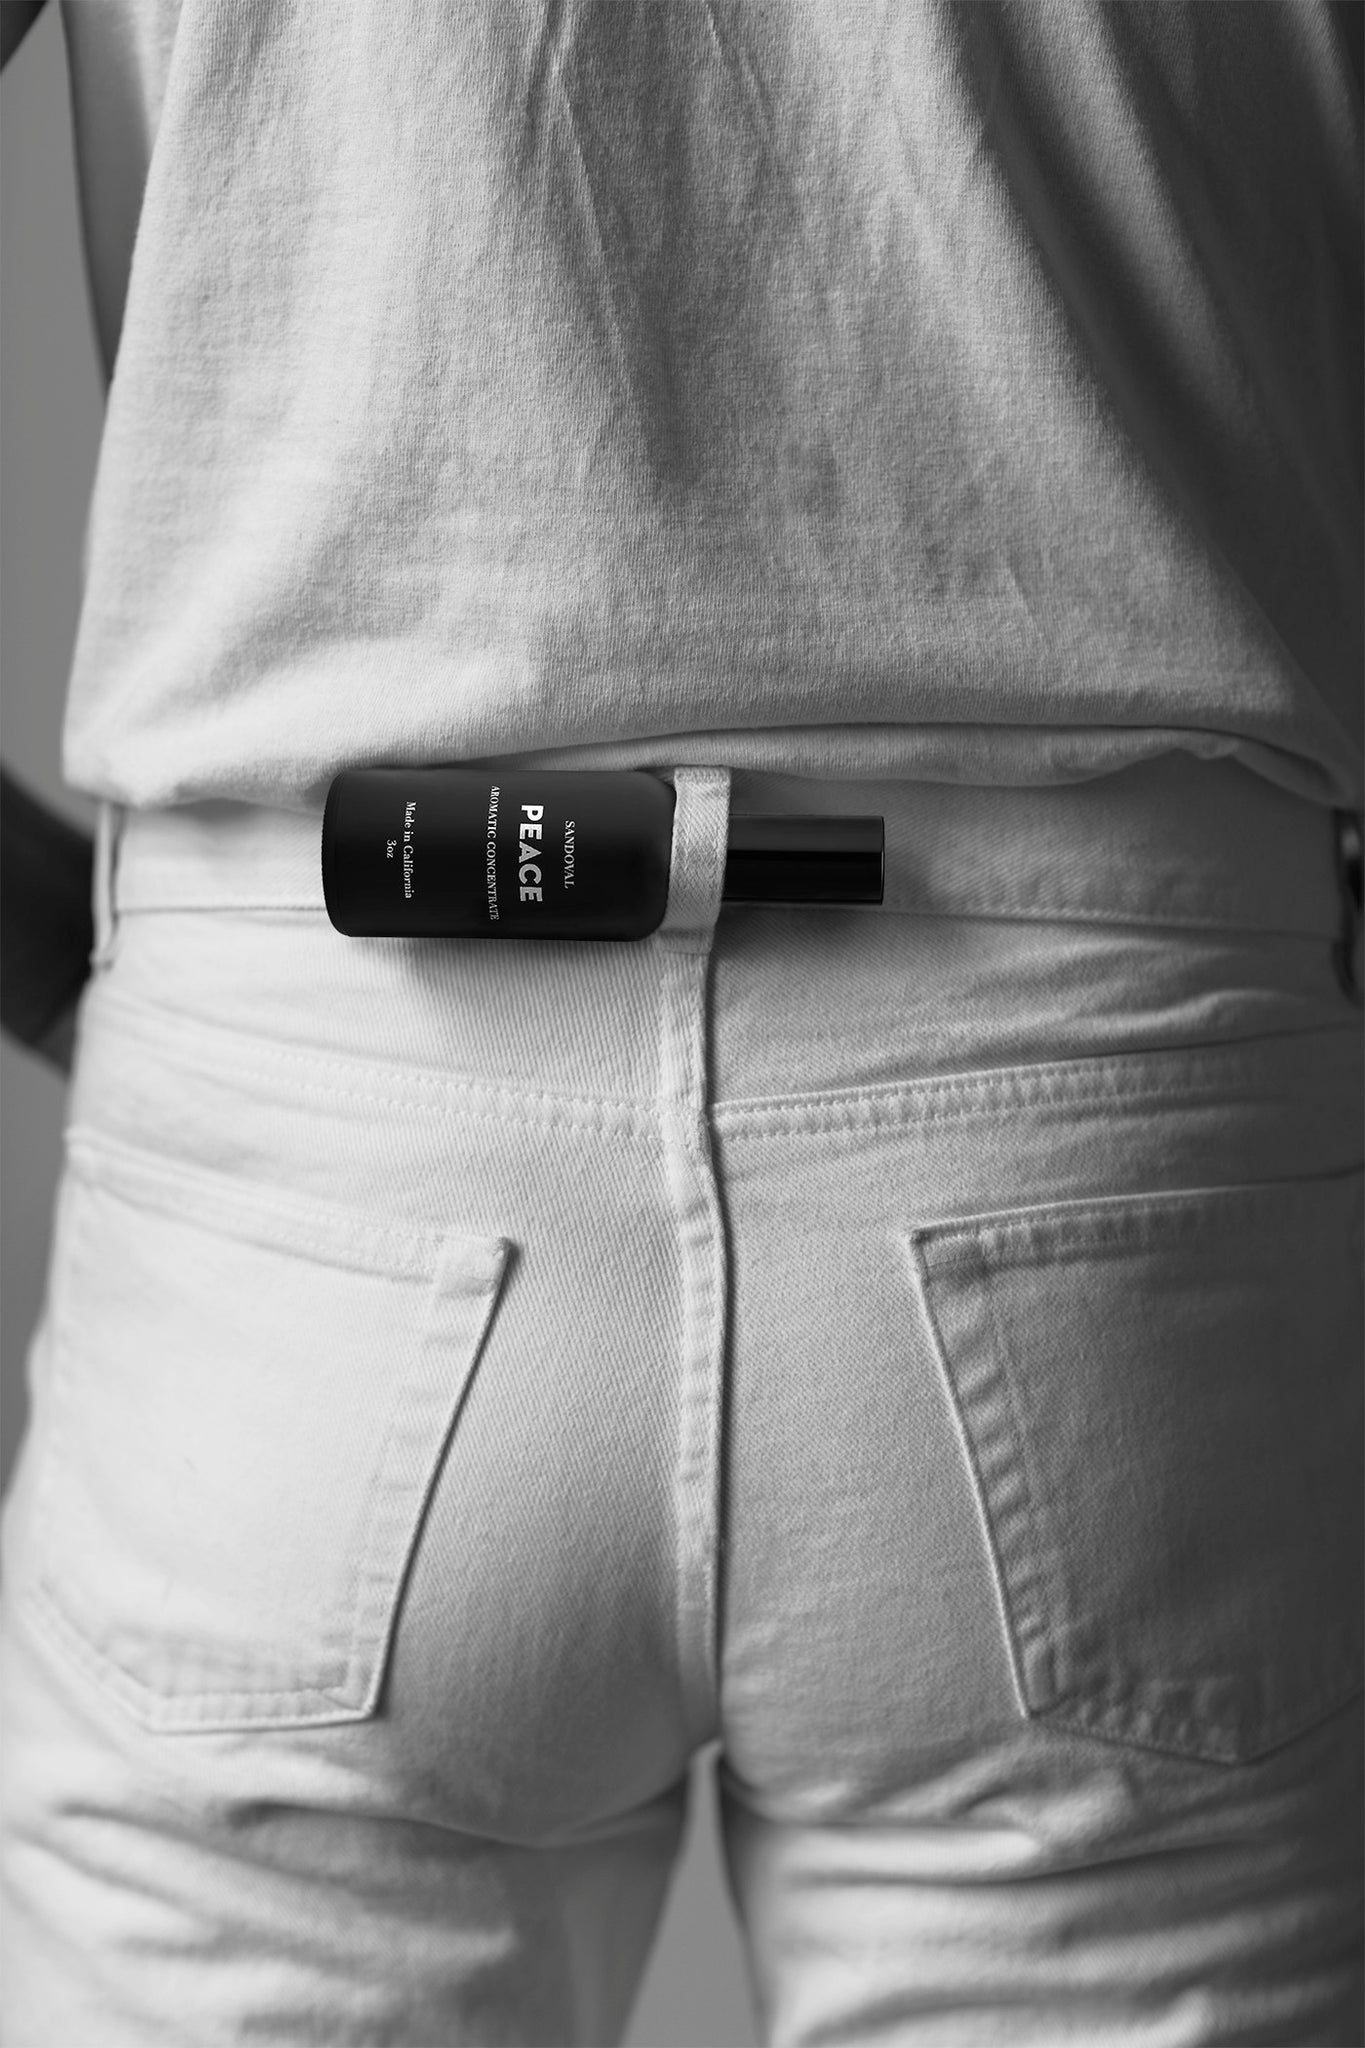 peace aromatic concentrate mist on the go in a belt loop on the back os a pair of white jeans